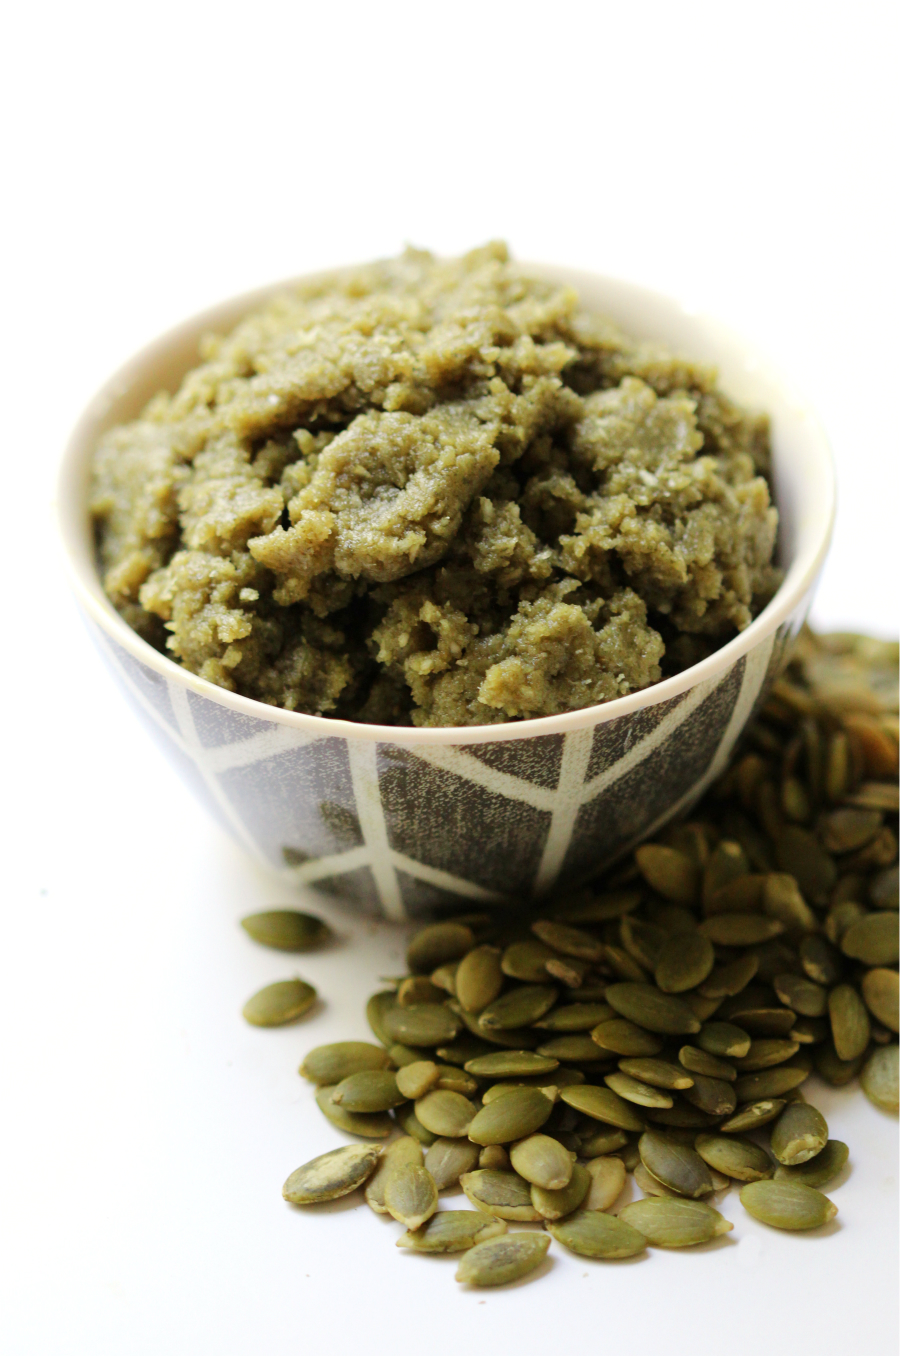 Raw Coconut Pumpkin Seed Butter | Strength and Sunshine @RebeccaGF666 A sweetly delicious and allergy-friendly spread for the ultimate snacking! A simple Raw Coconut Pumpkin Seed Butter recipe that's gluten-free, vegan, paleo, and nut-free! Use it as a dip or spread for fruit, toast, maybe just eaten with a spoon!